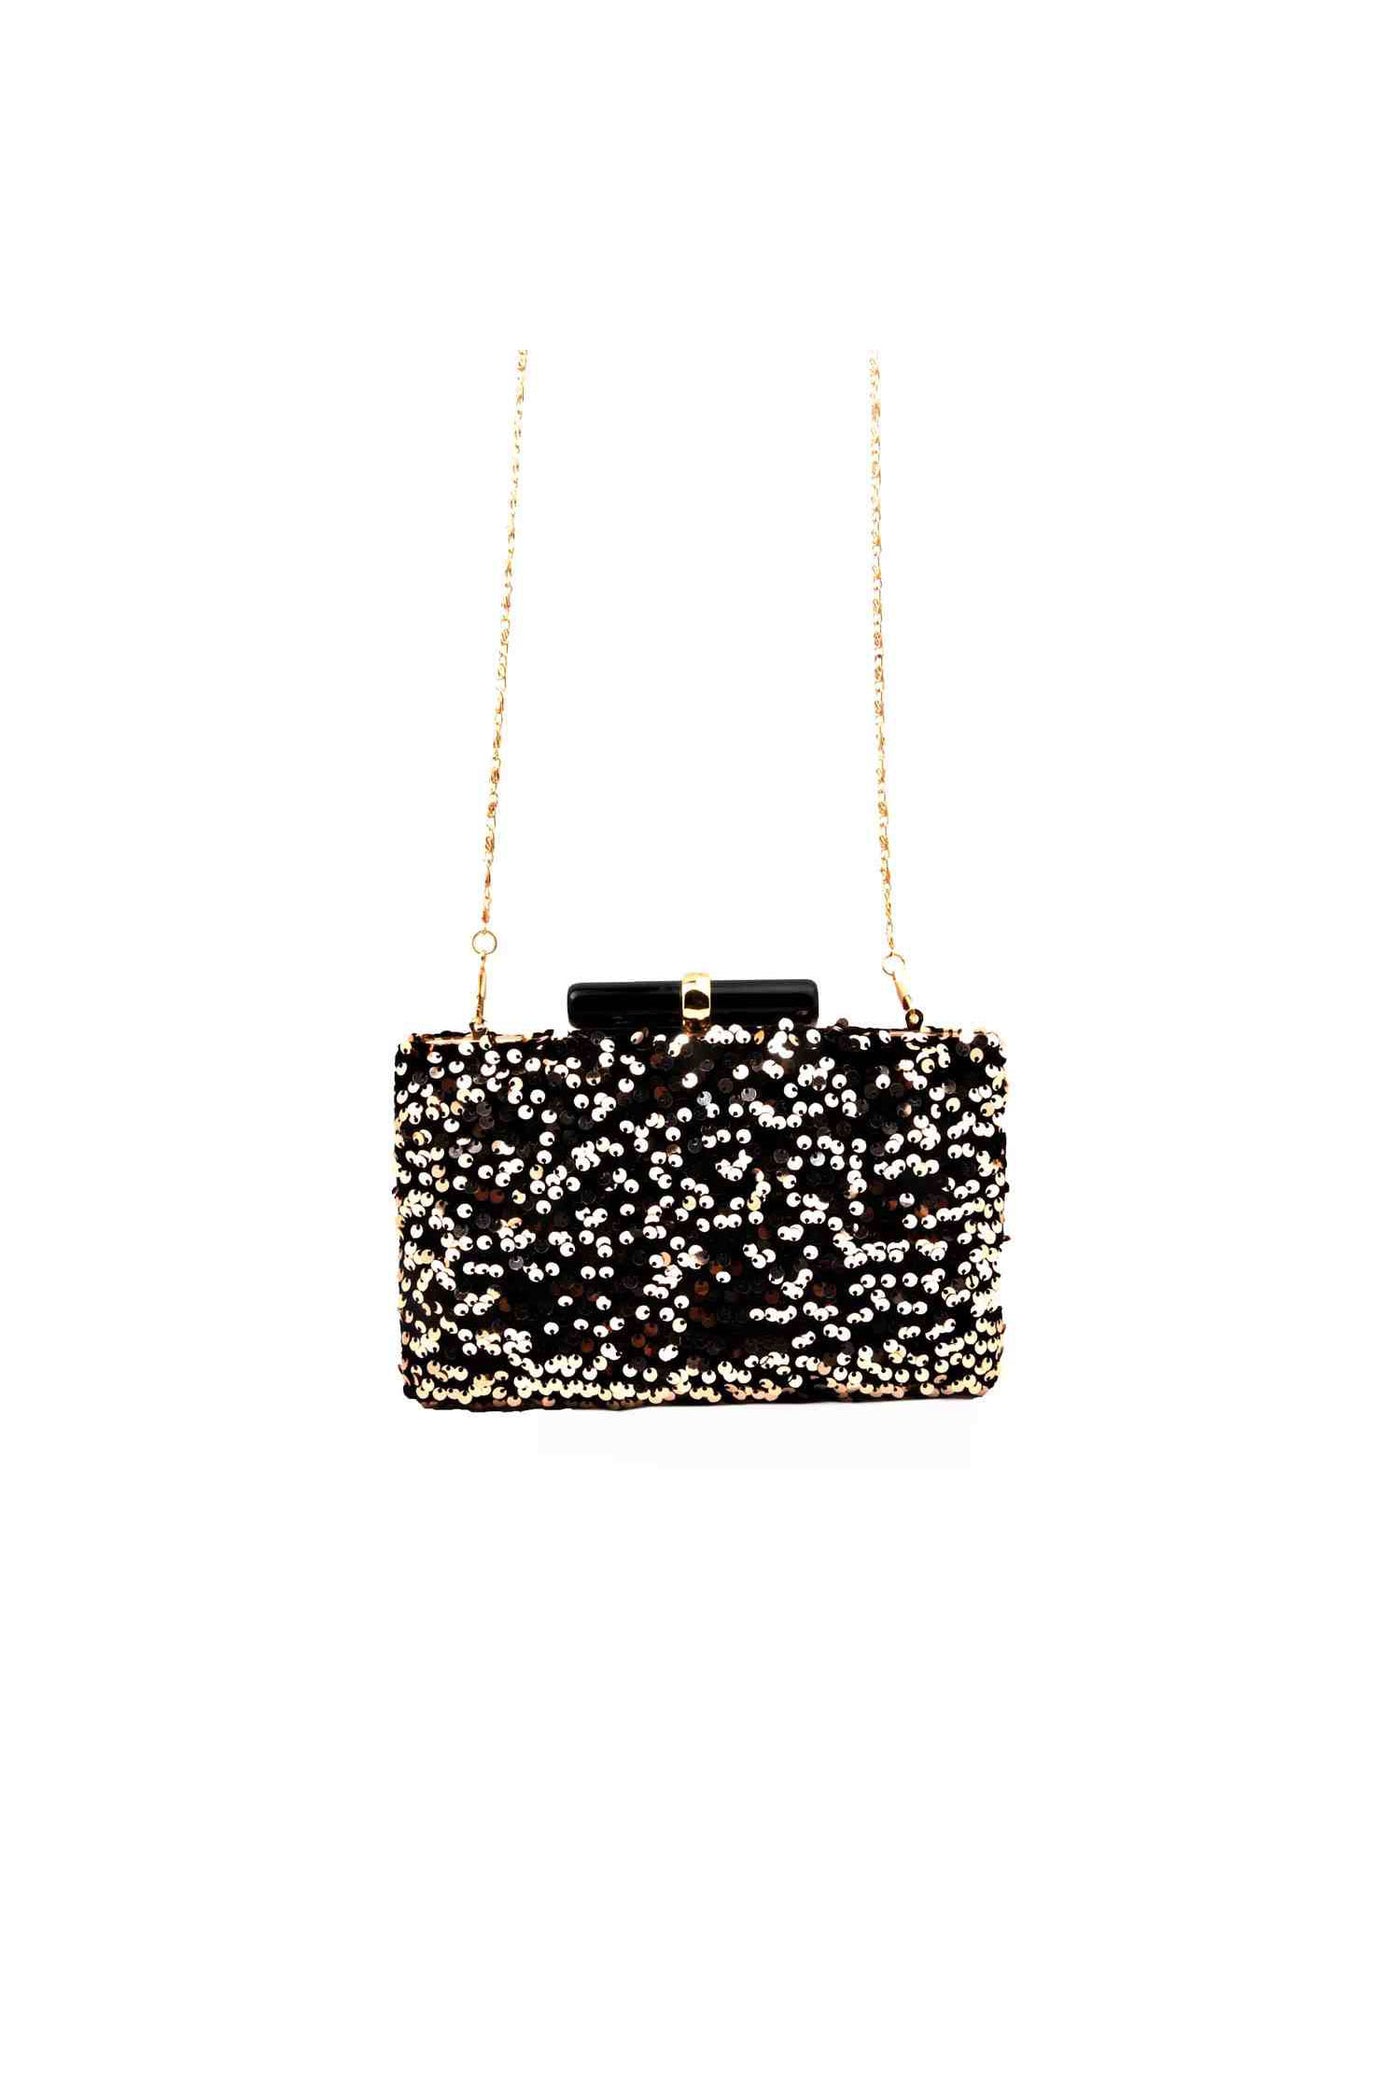 Black and Rose Gold Sequins Party Clutch